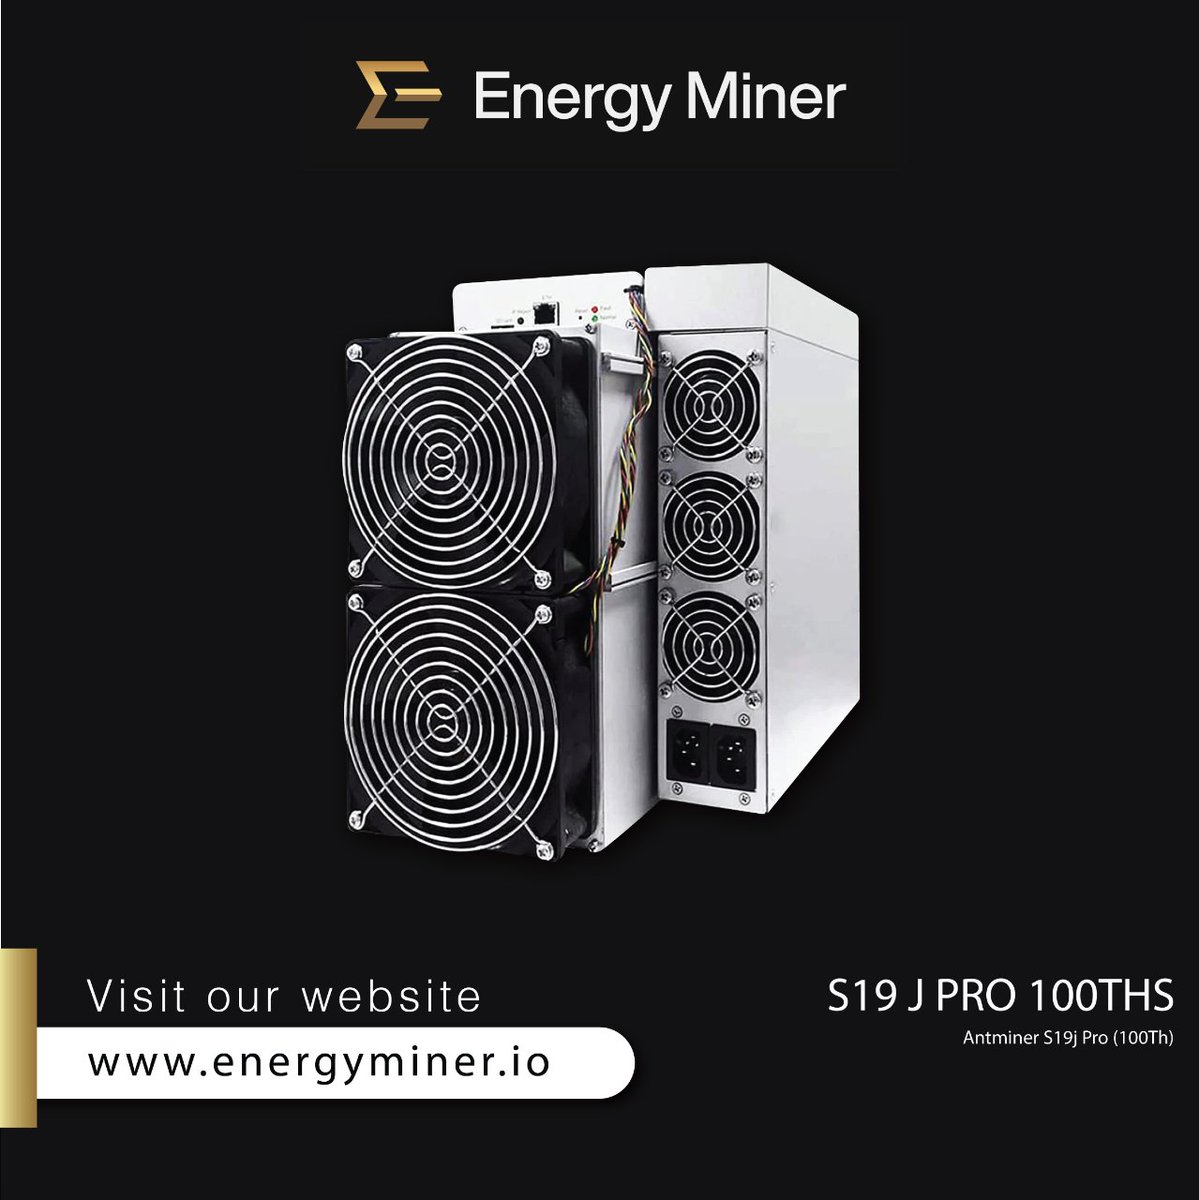 Looking for new mining equipment? ⛏️✨ EnergyMiner offers a wide range of hardware options to suit your mining needs.

➡️ Visit our website energyminer.io and learn more about our products!

#SustainableMining #CryptoMining #BusinessSolutions